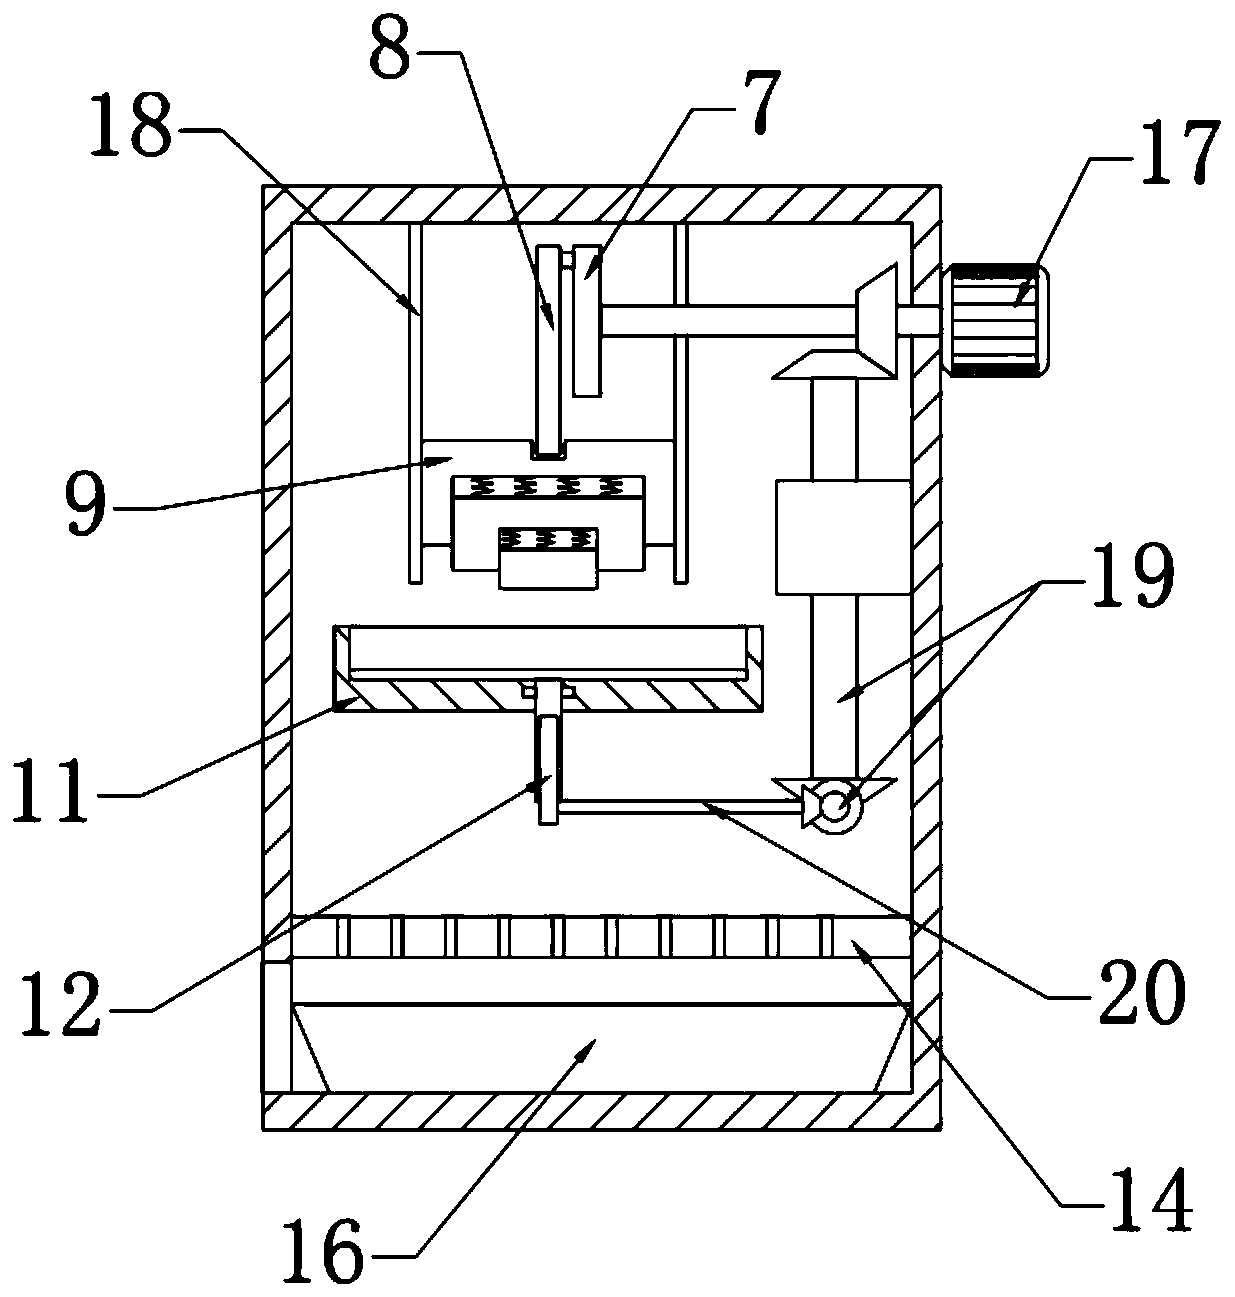 Pounding device for processing medicinal materials